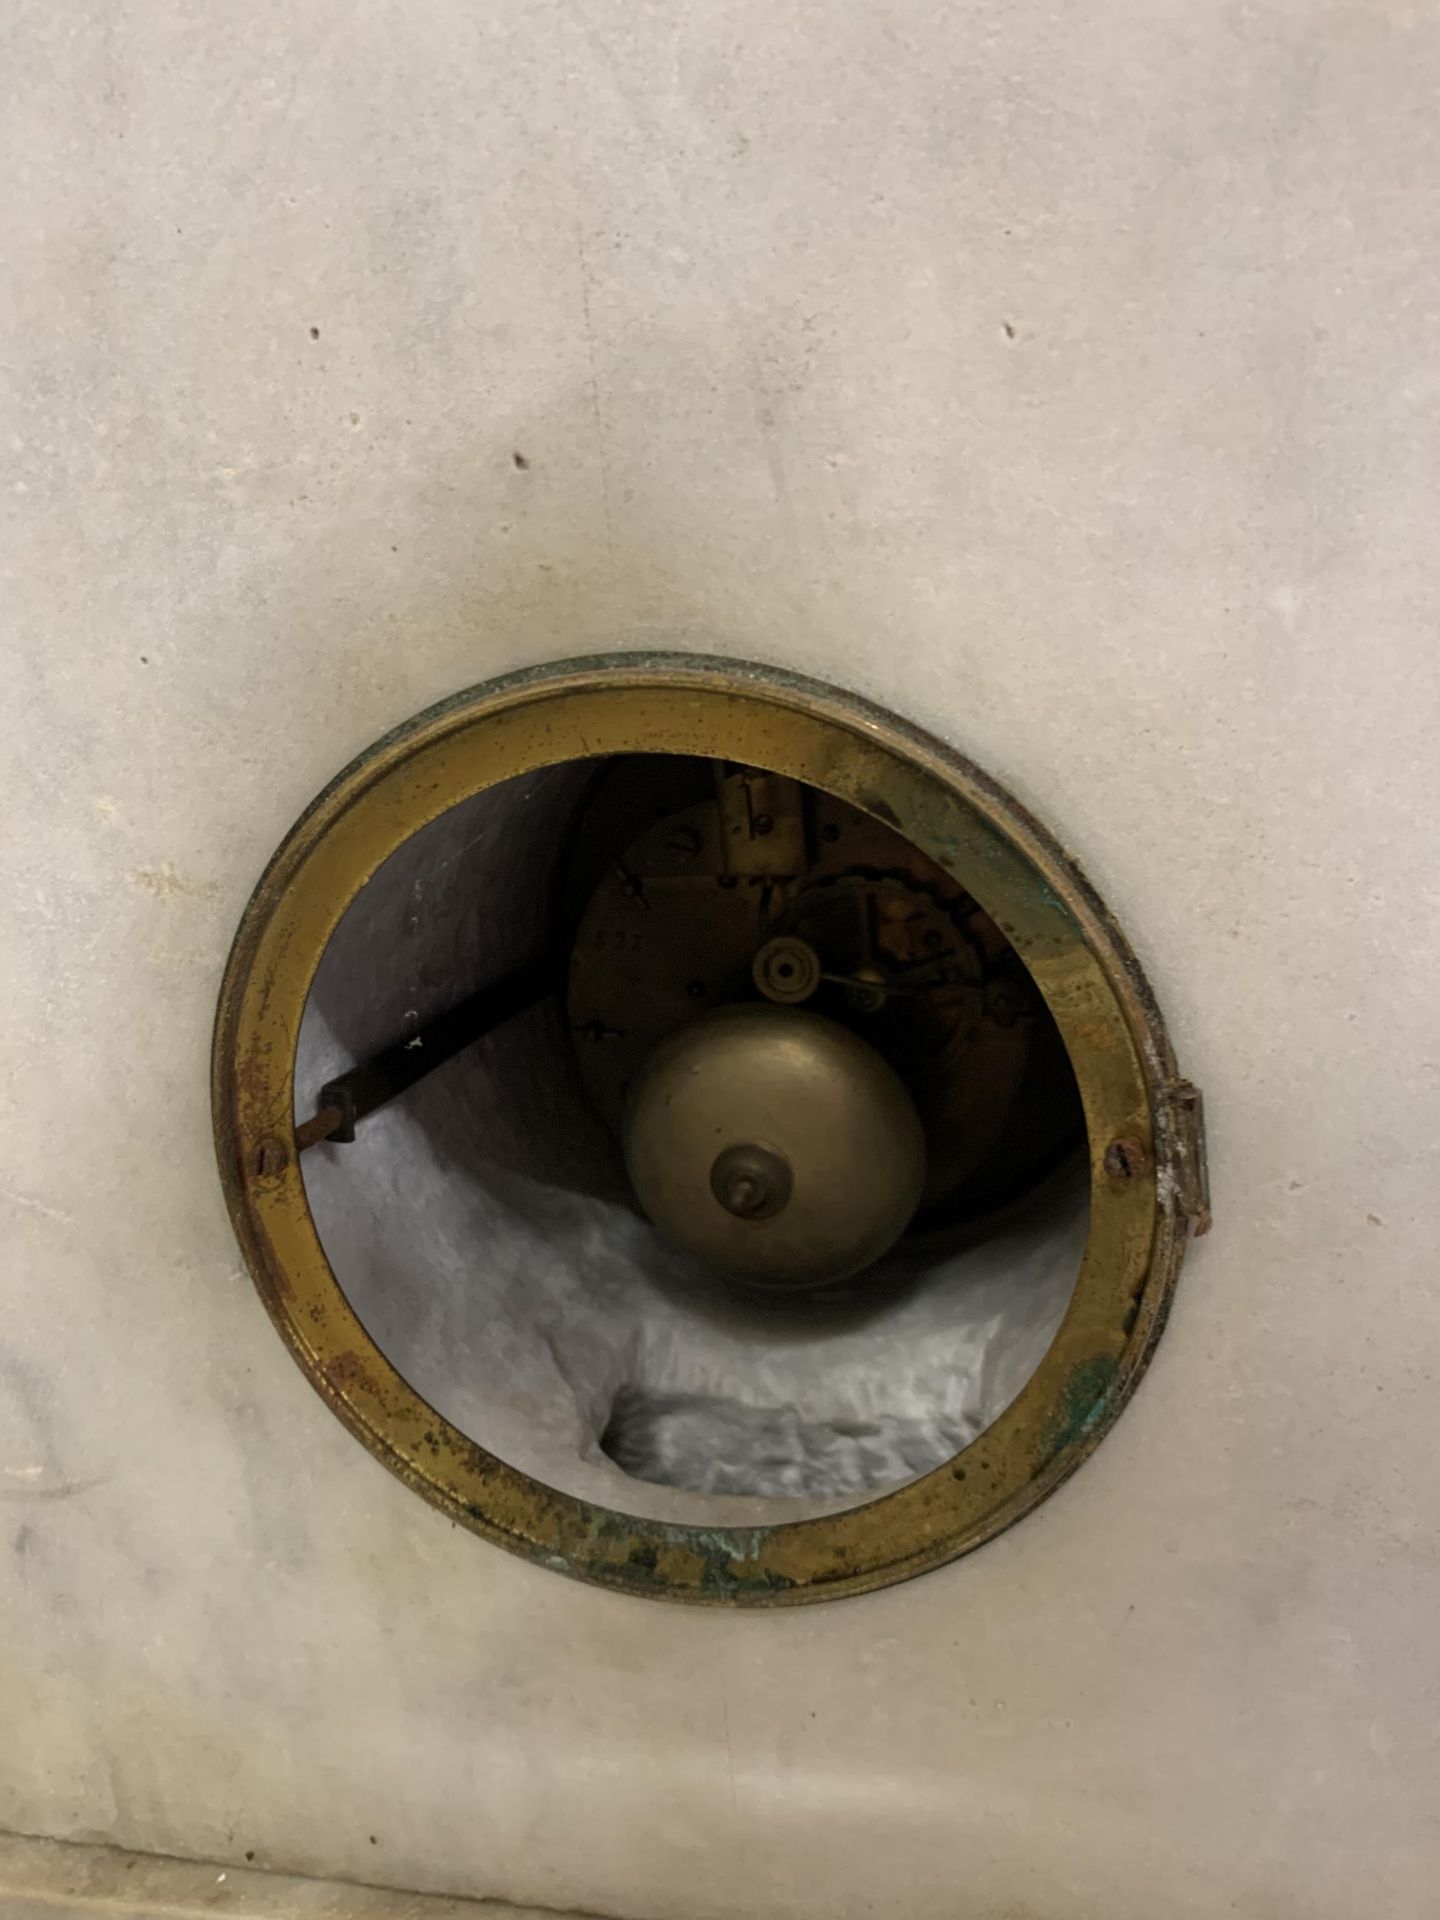 A VERY HEAVY WHITE MARBLE CLOCK WITH KEY AND PENDULUM - Image 3 of 6